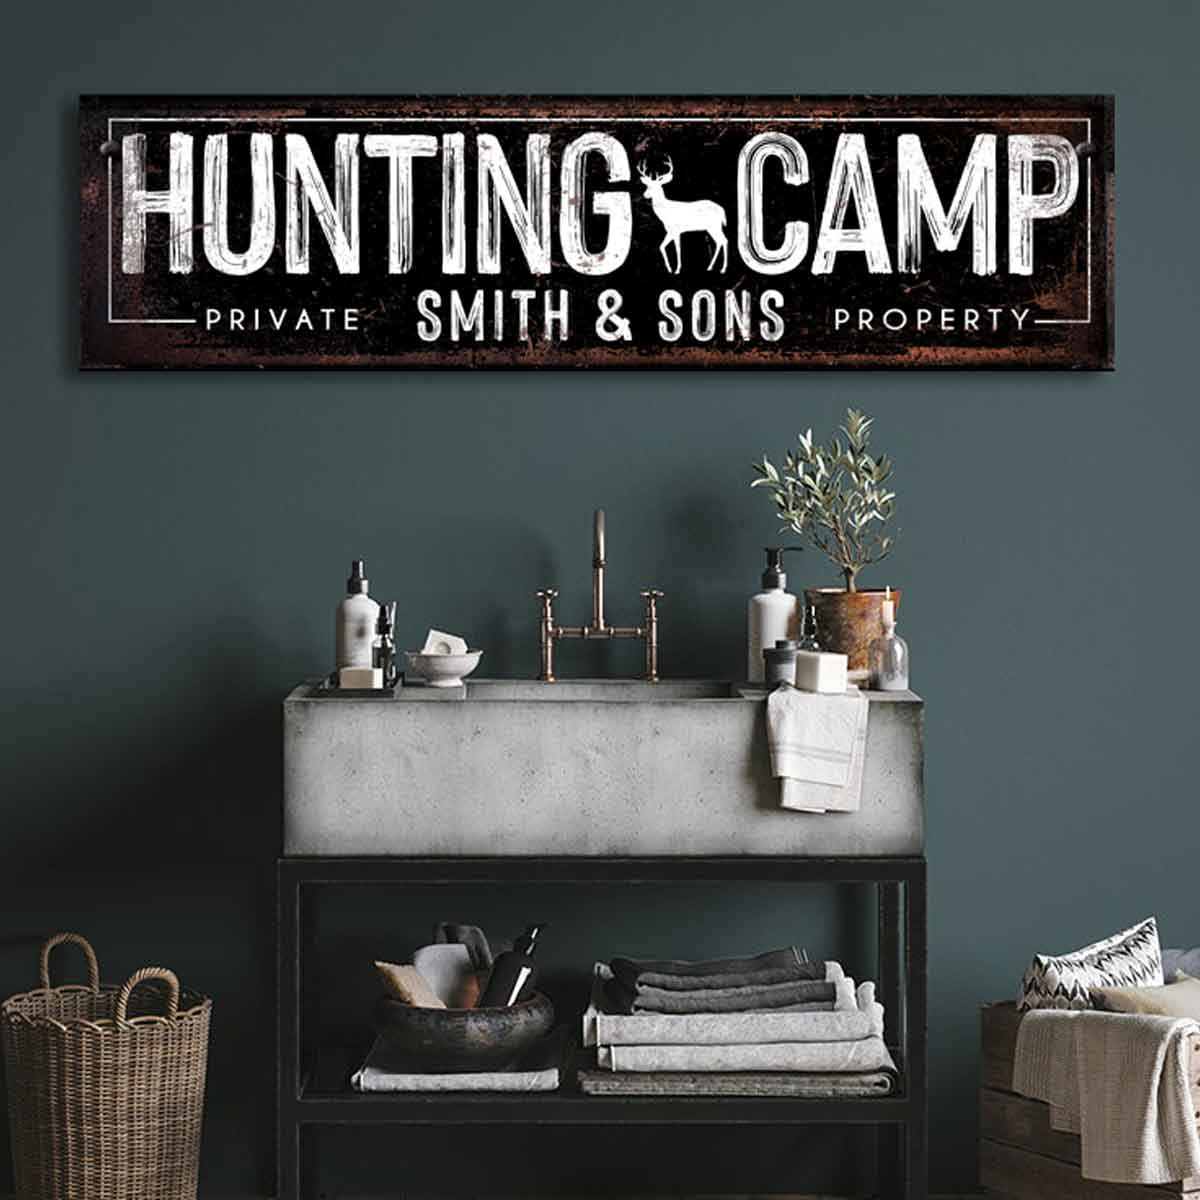 Cabin decor - Hunting Camp sign 0n black distressed background and the words [hunting camp] private property